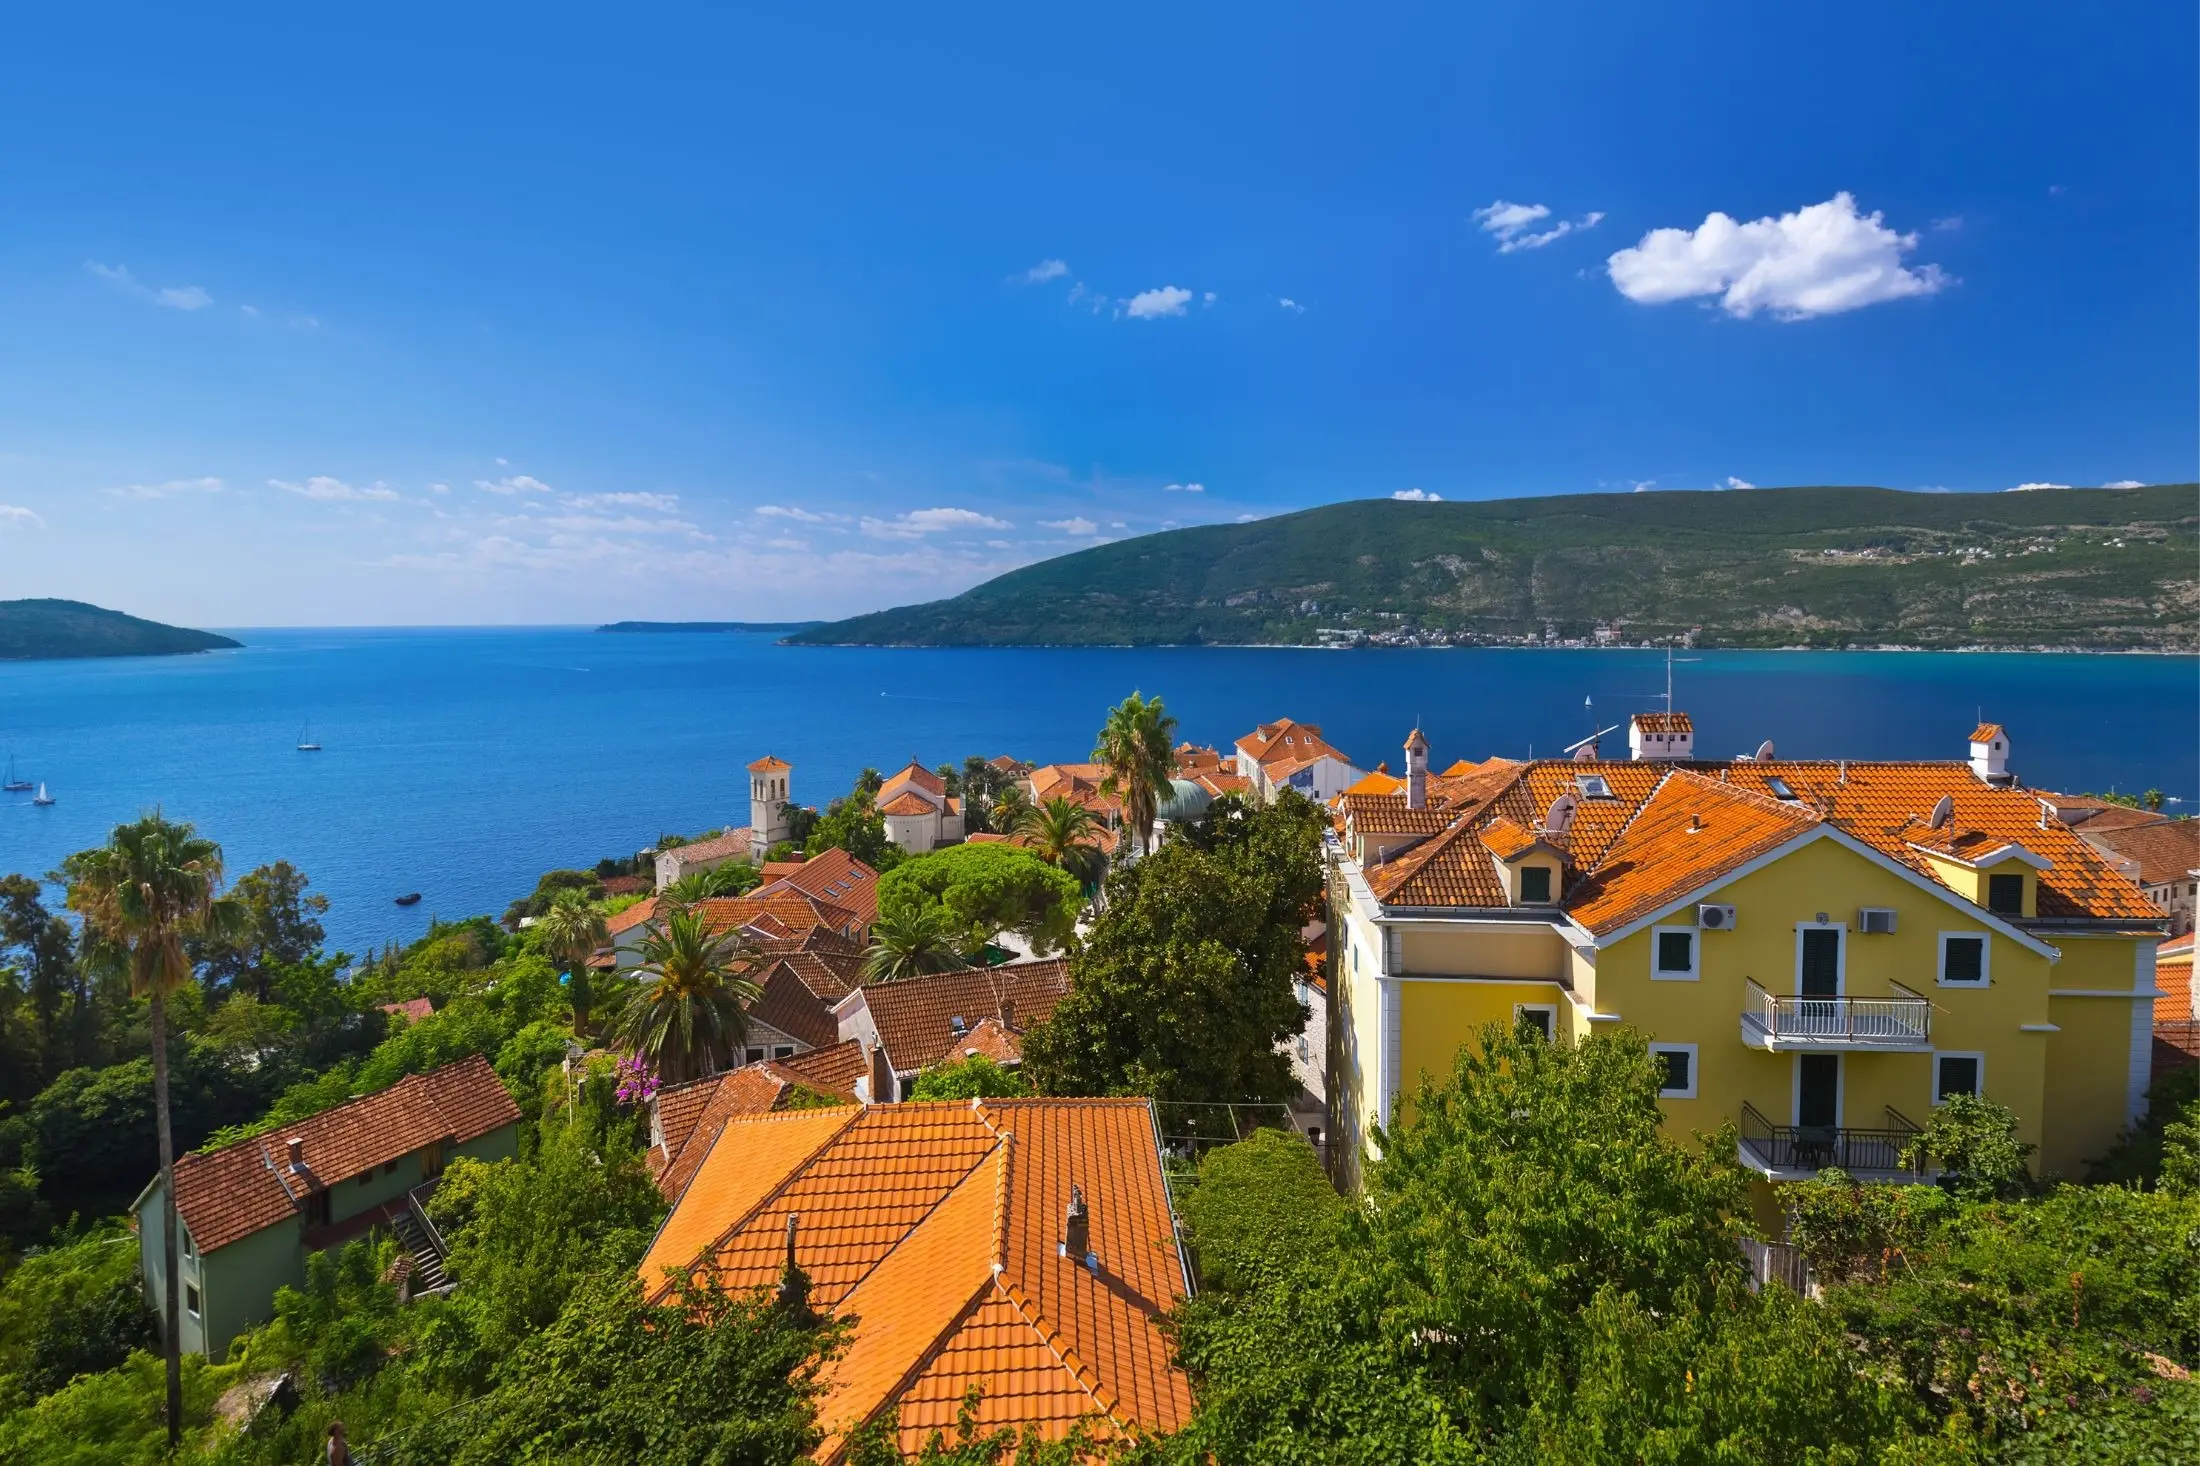 Herceg Novi - a Town of Hidden Natural Treasures, the Crossroads of the East and the West